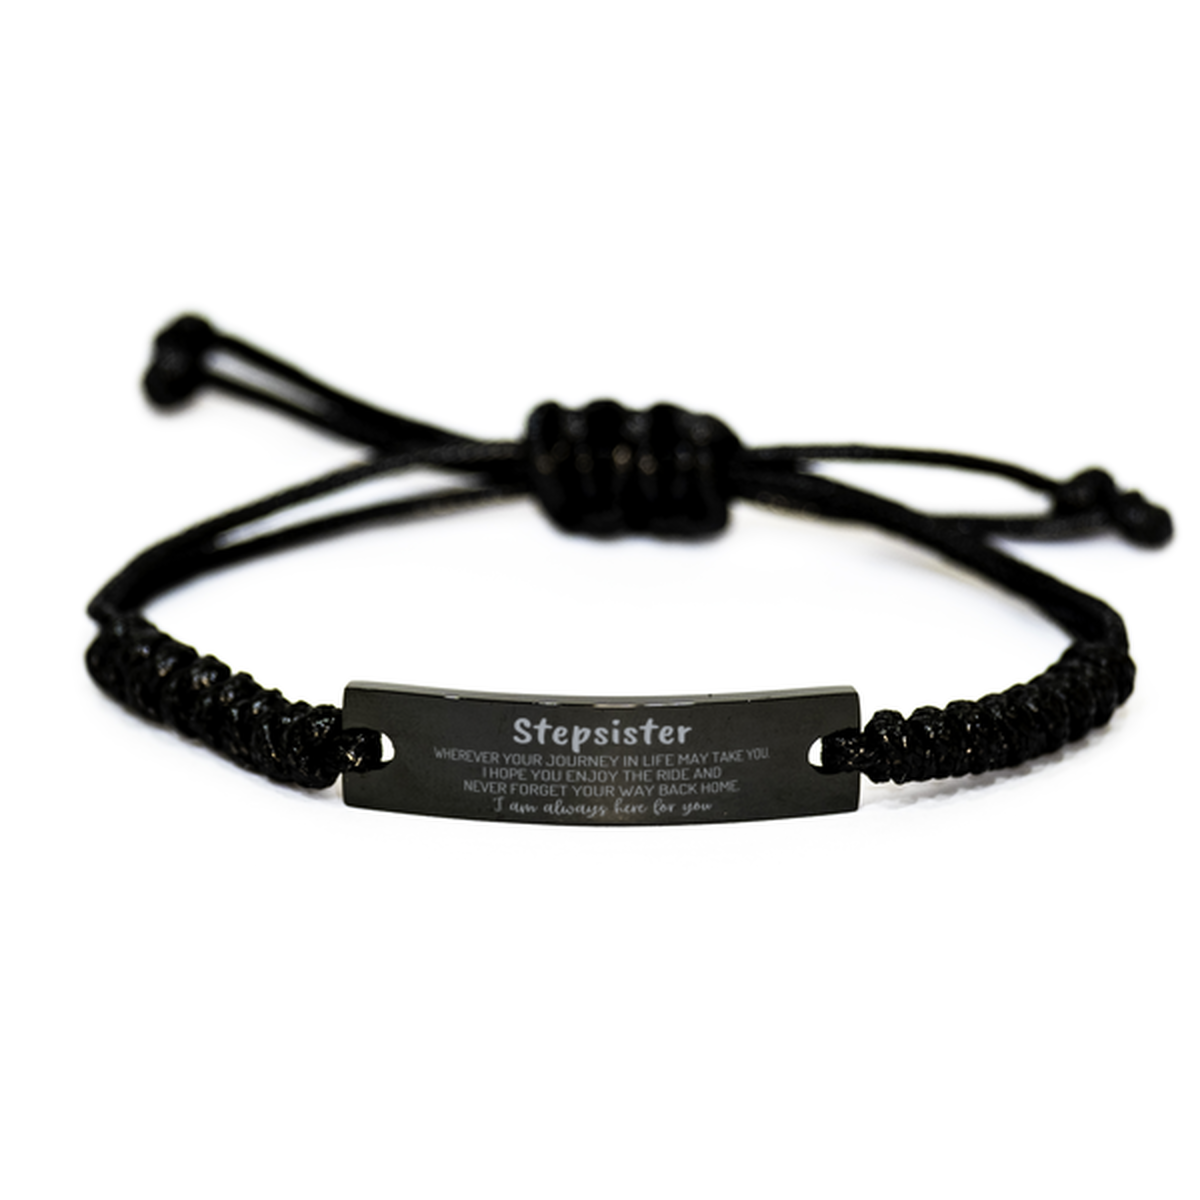 Stepsister wherever your journey in life may take you, I am always here for you Stepsister Black Rope Bracelet, Awesome Christmas Gifts For Stepsister, Stepsister Birthday Gifts for Men Women Family Loved One